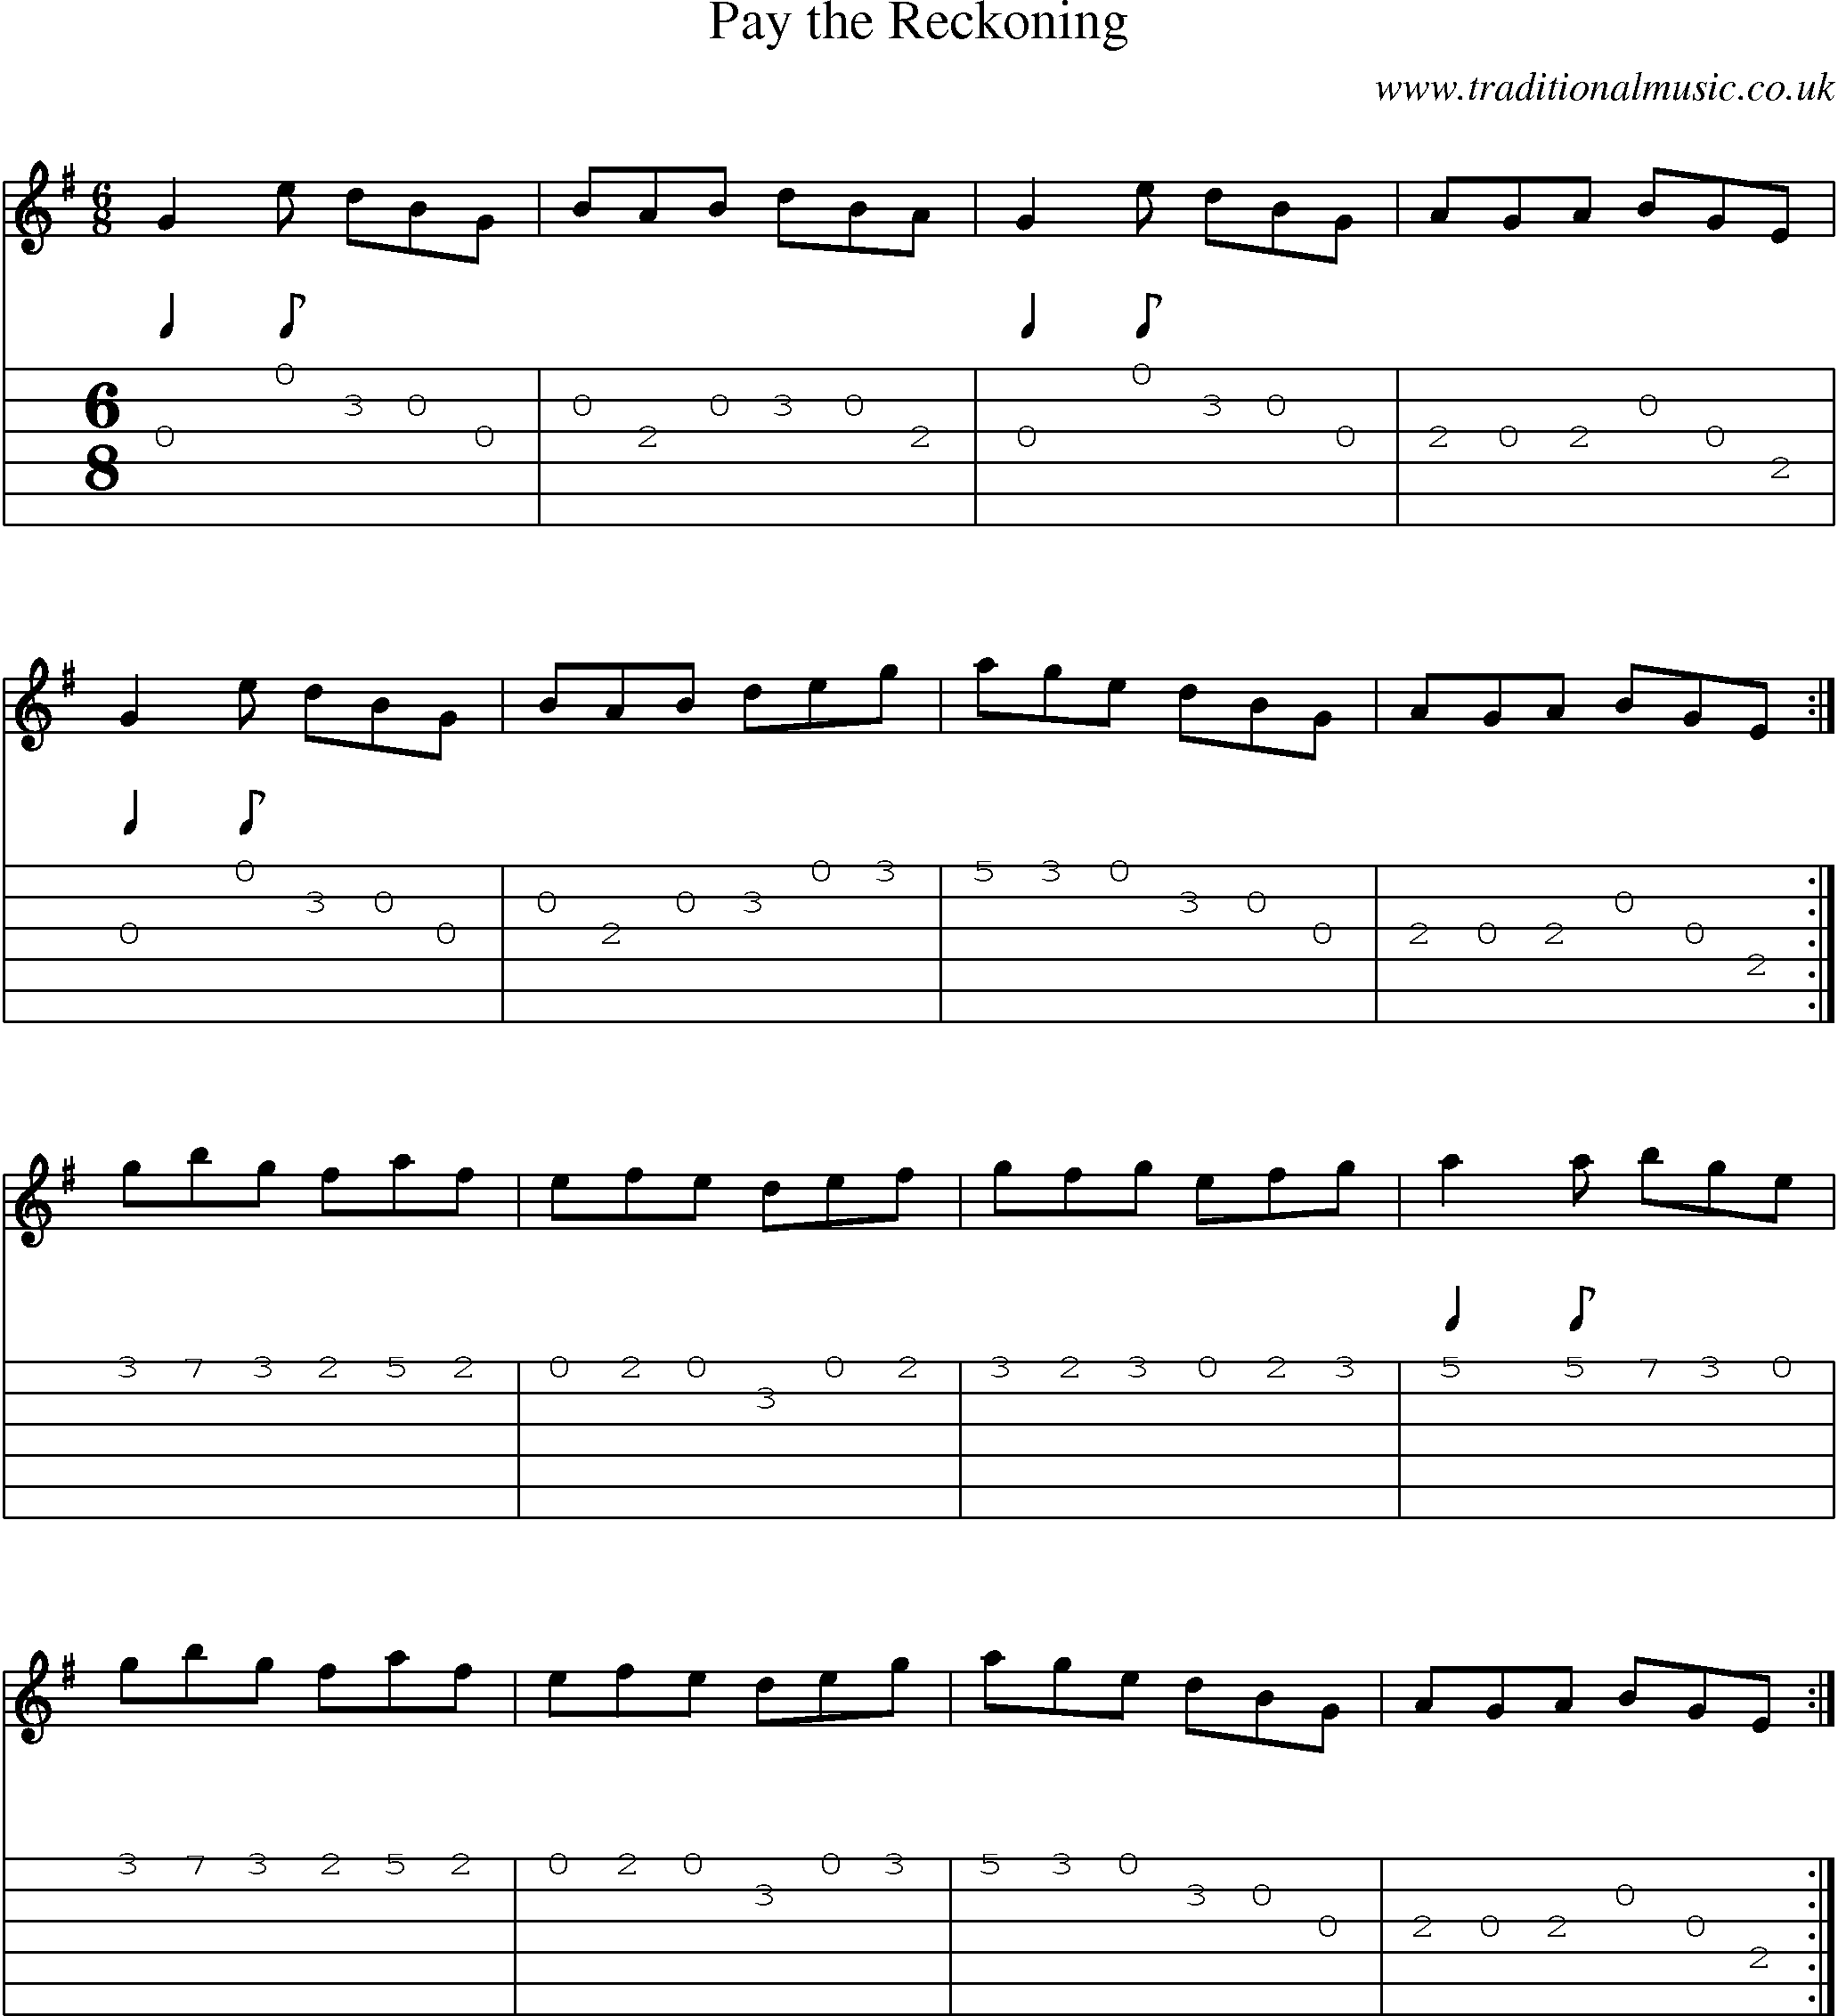 Music Score and Guitar Tabs for Pay Reckoning